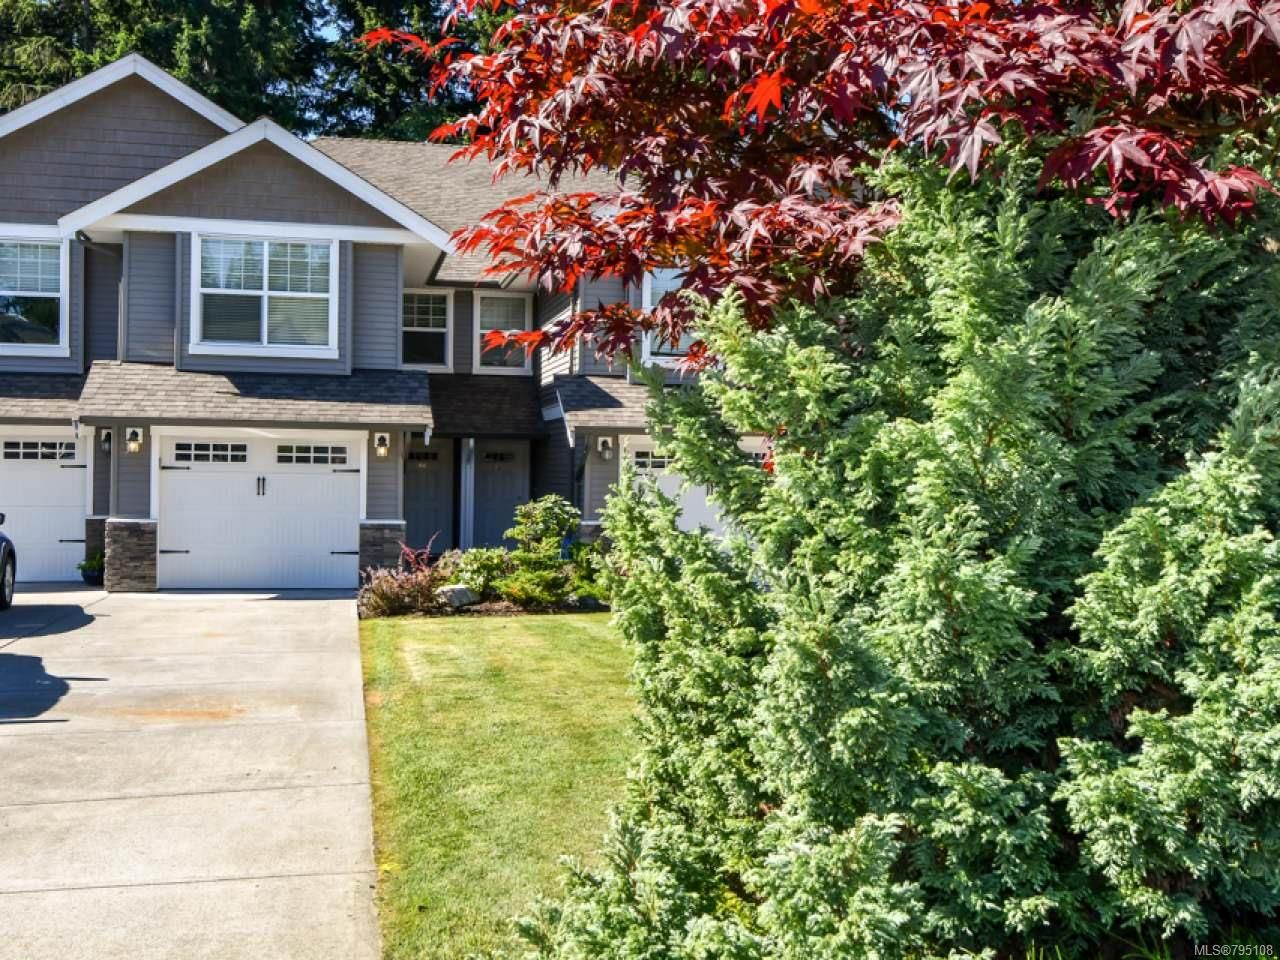 Main Photo: 7 1330 Creekside Way in CAMPBELL RIVER: CR Willow Point Half Duplex for sale (Campbell River)  : MLS®# 795108